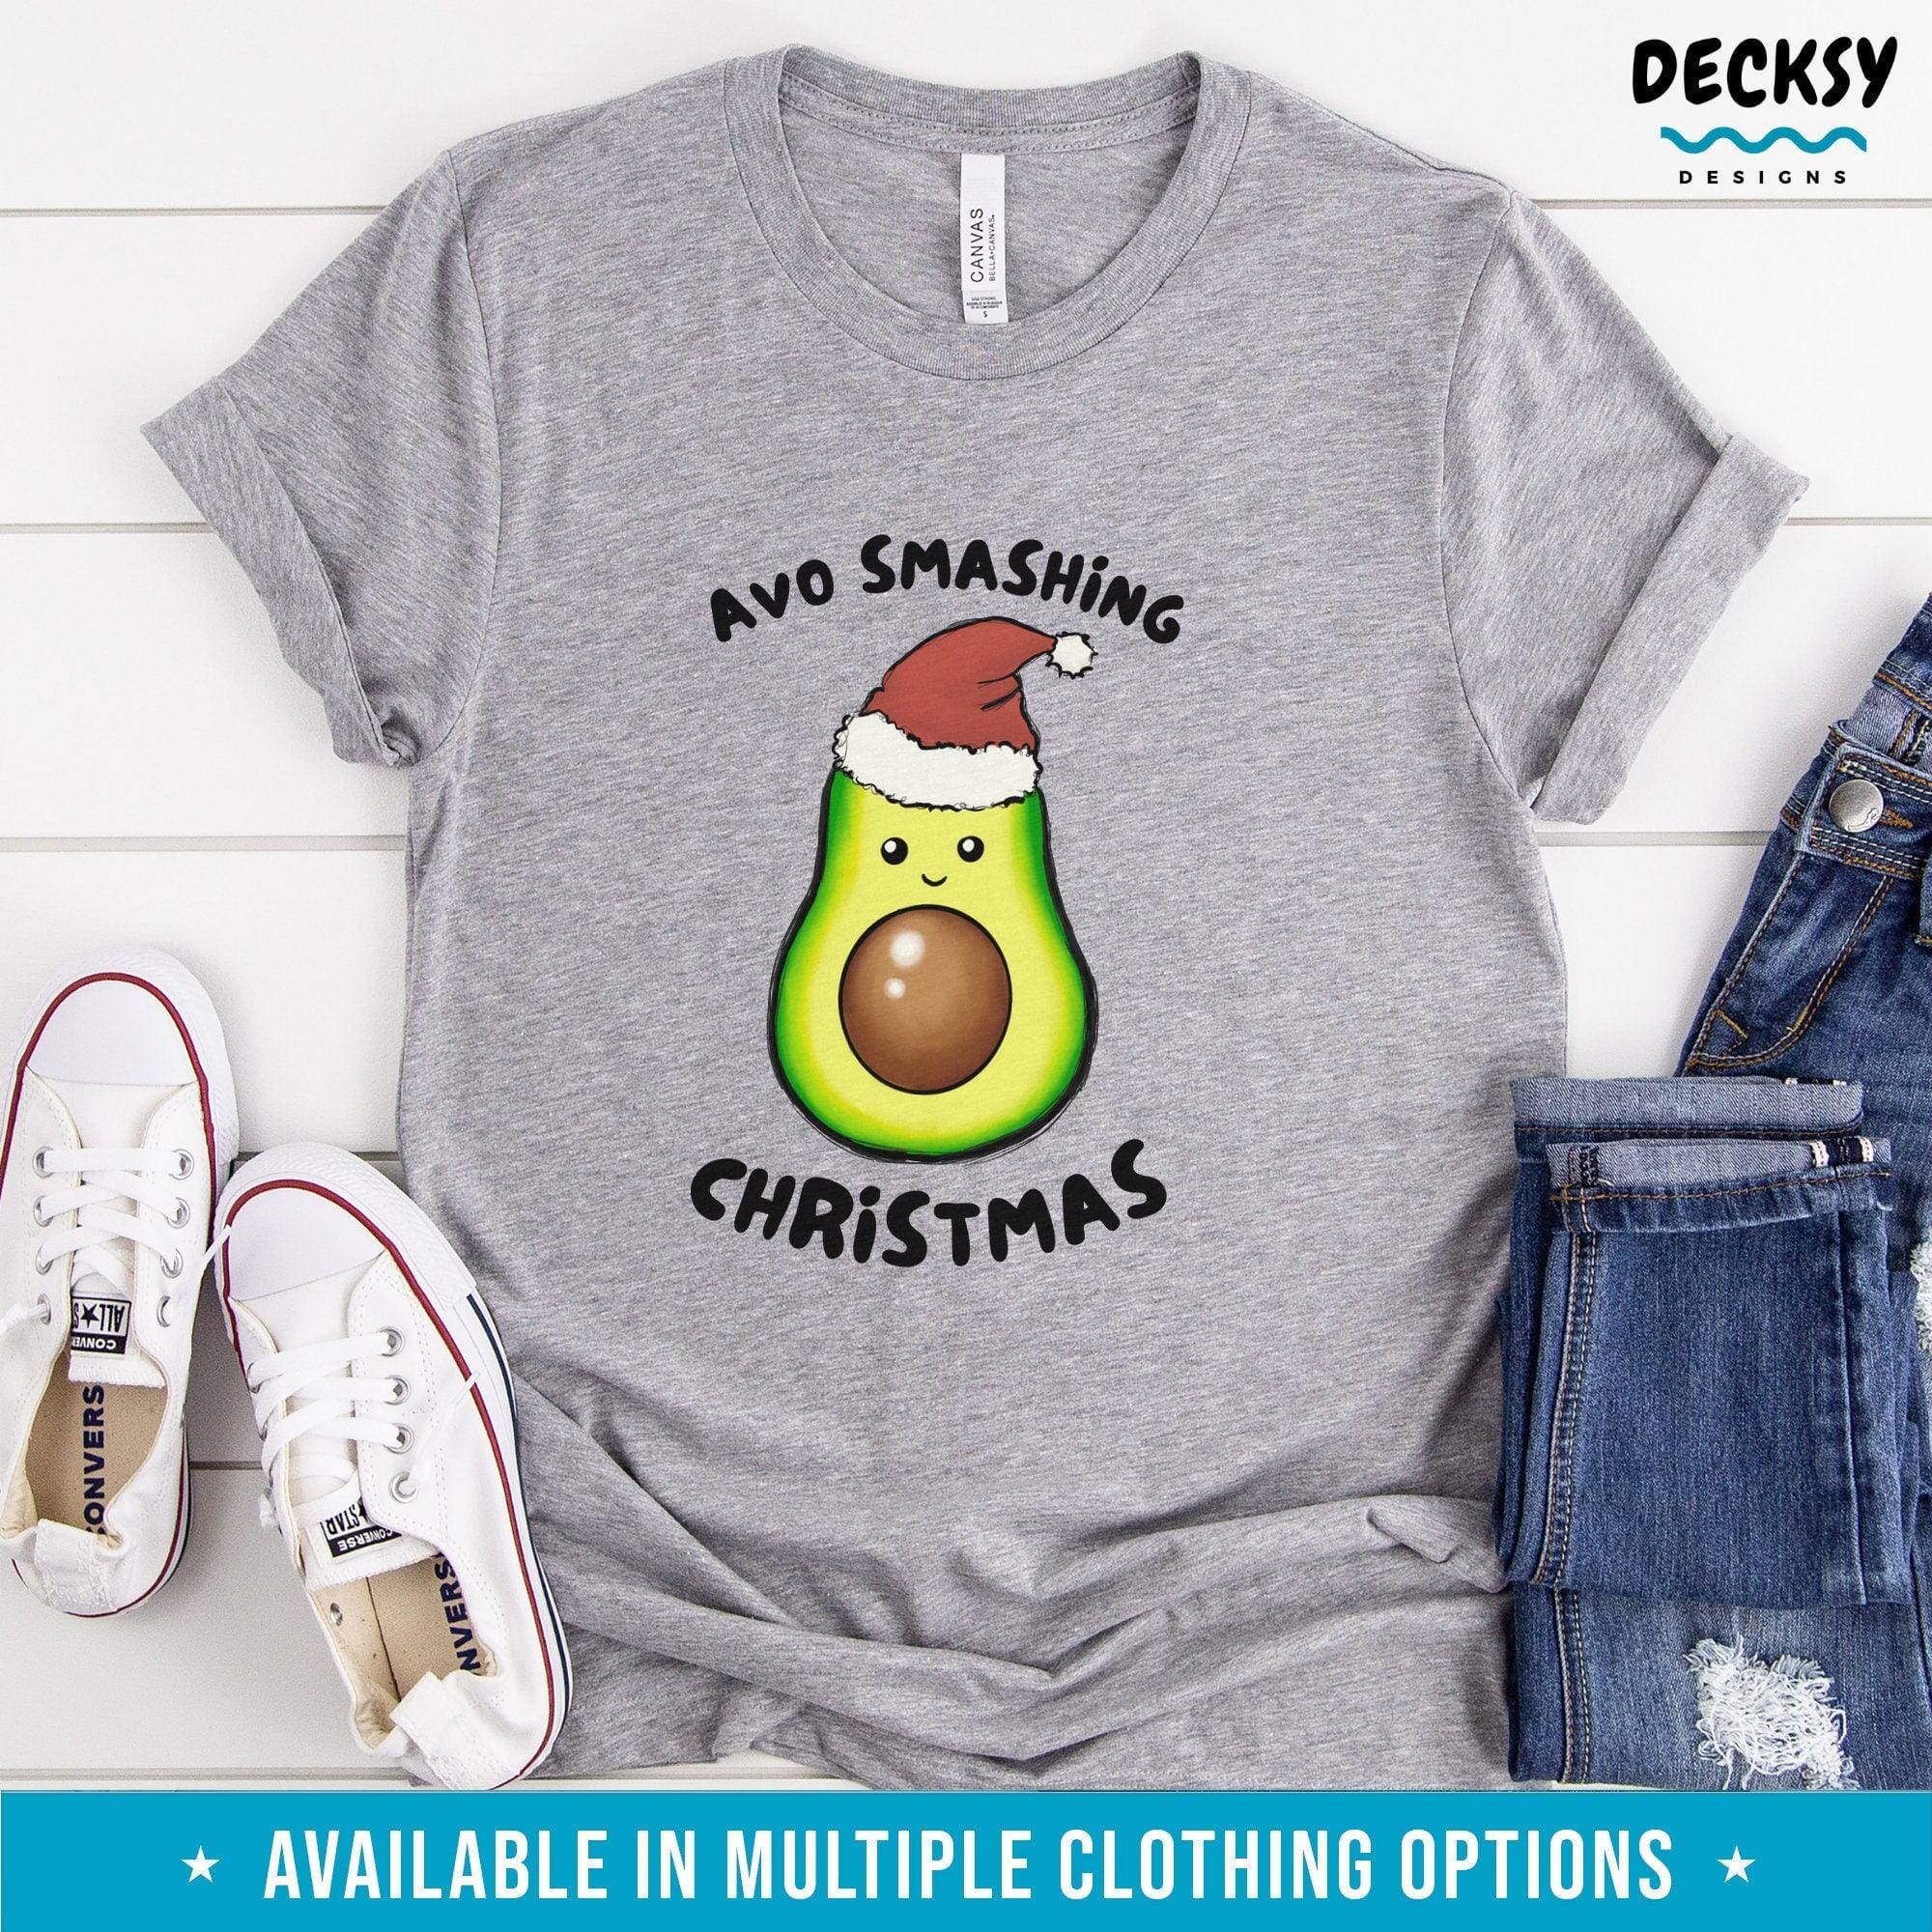 Cute Avocado Christmas Shirt, Gift For Christmas-Clothing:Gender-Neutral Adult Clothing:Tops & Tees:T-shirts:Graphic Tees-DecksyDesigns